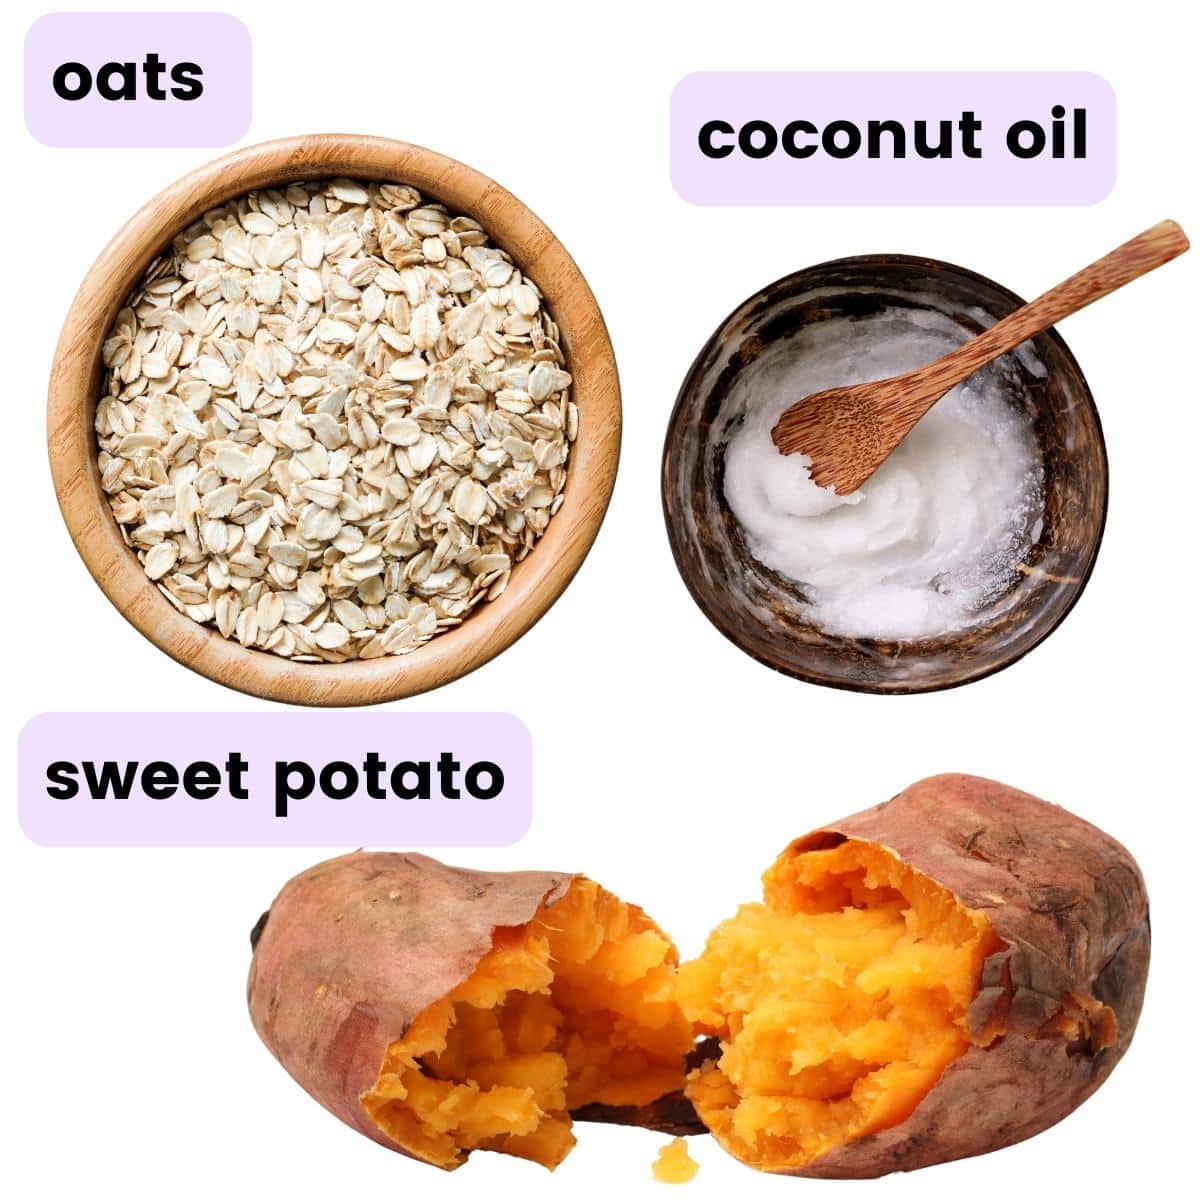 oats, coconut oil and sweet potato